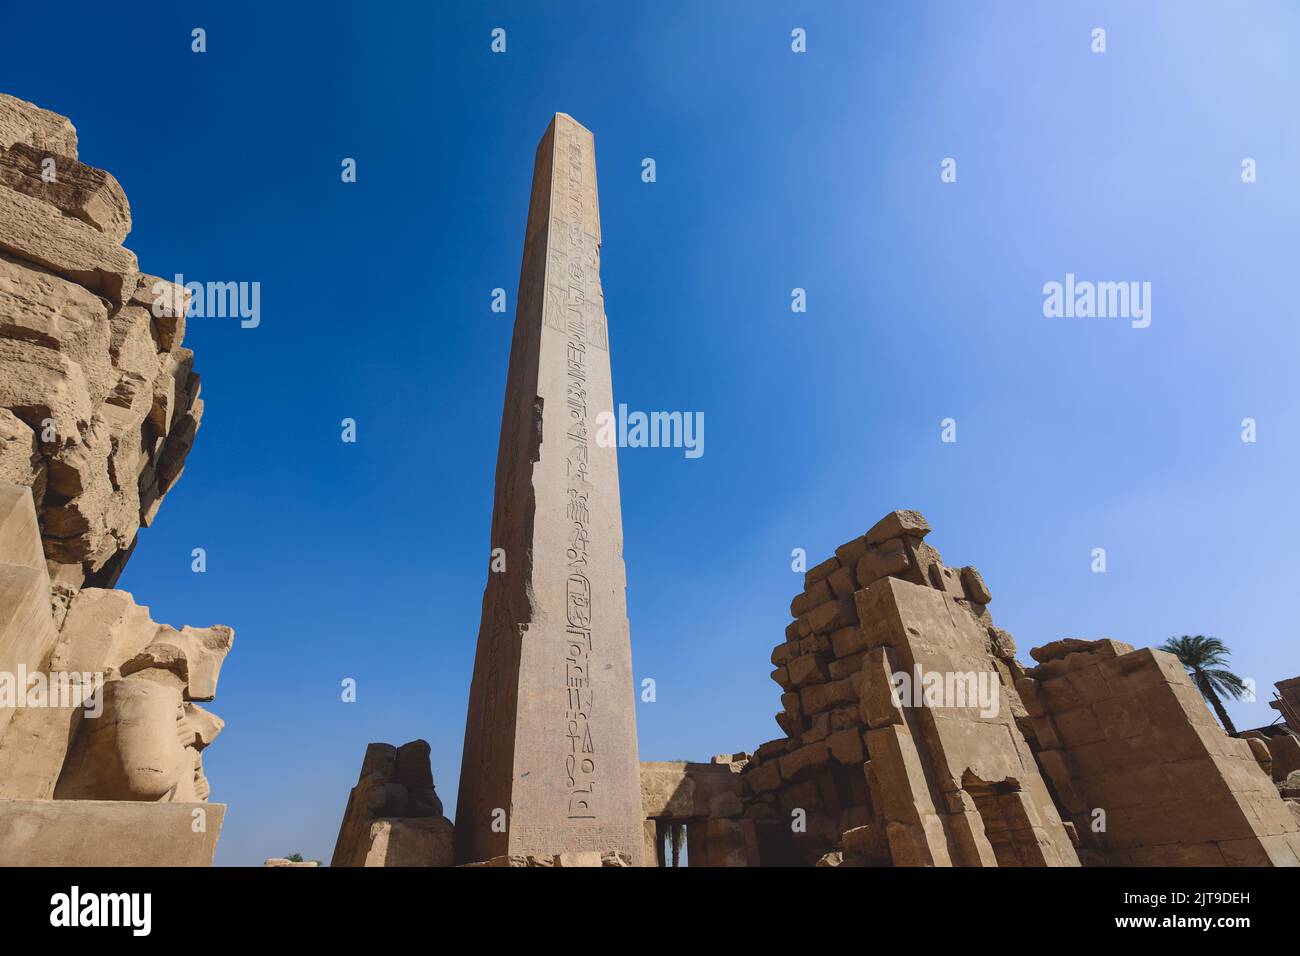 View to the Ancient Egyptian Ruins of Obelisk of Thutmosis I in Karnak Temple Complex near Luxor, Egypt Stock Photo